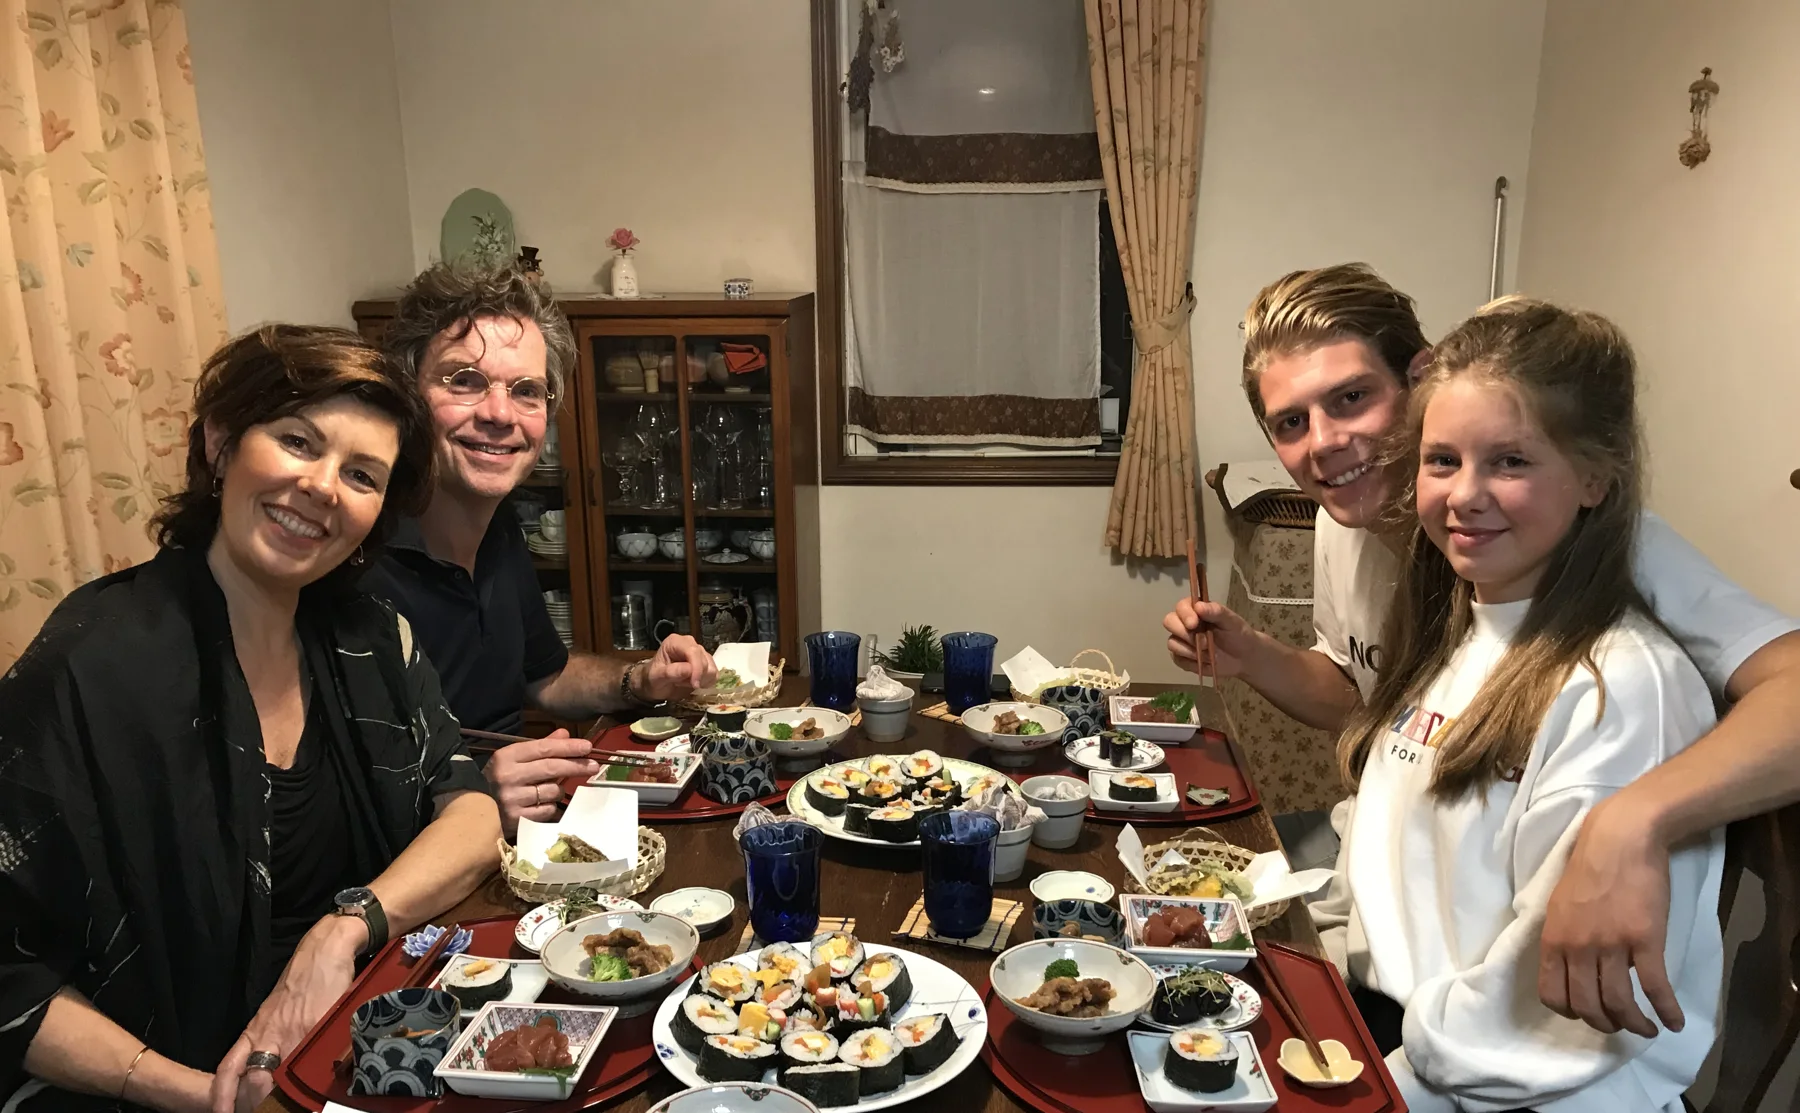 Cooking lesson of Norimaki, kinds of Japanese traditional sushi and dinner - 1266890